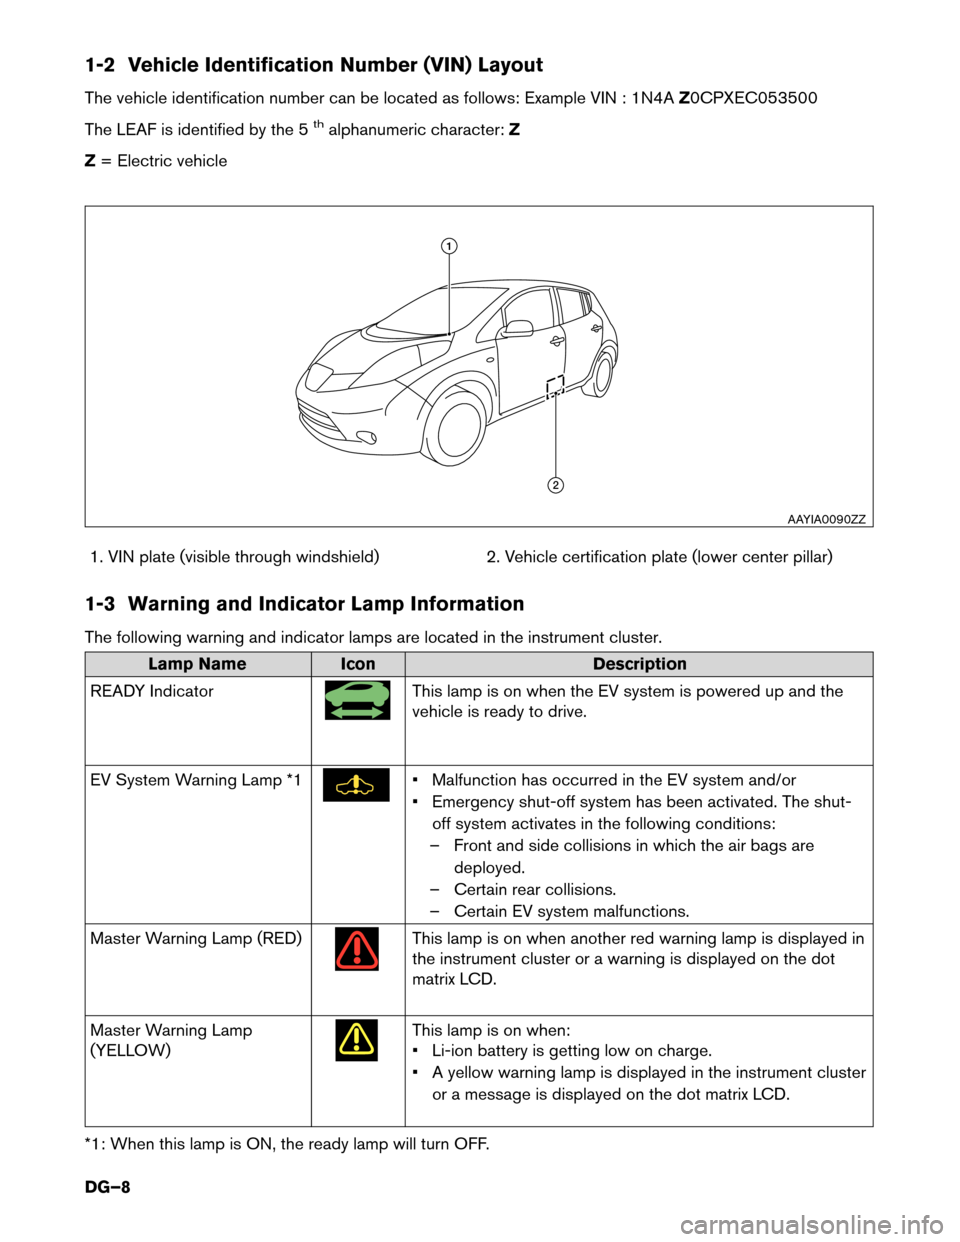 NISSAN LEAF 2014 1.G Dismantling Guide 1-2 Vehicle Identification Number (VIN) Layout
The
vehicle identification number can be located as follows: Example VIN : 1N4A Z0CPXEC053500
The LEAF is identified by the 5
thalphanumeric character: Z